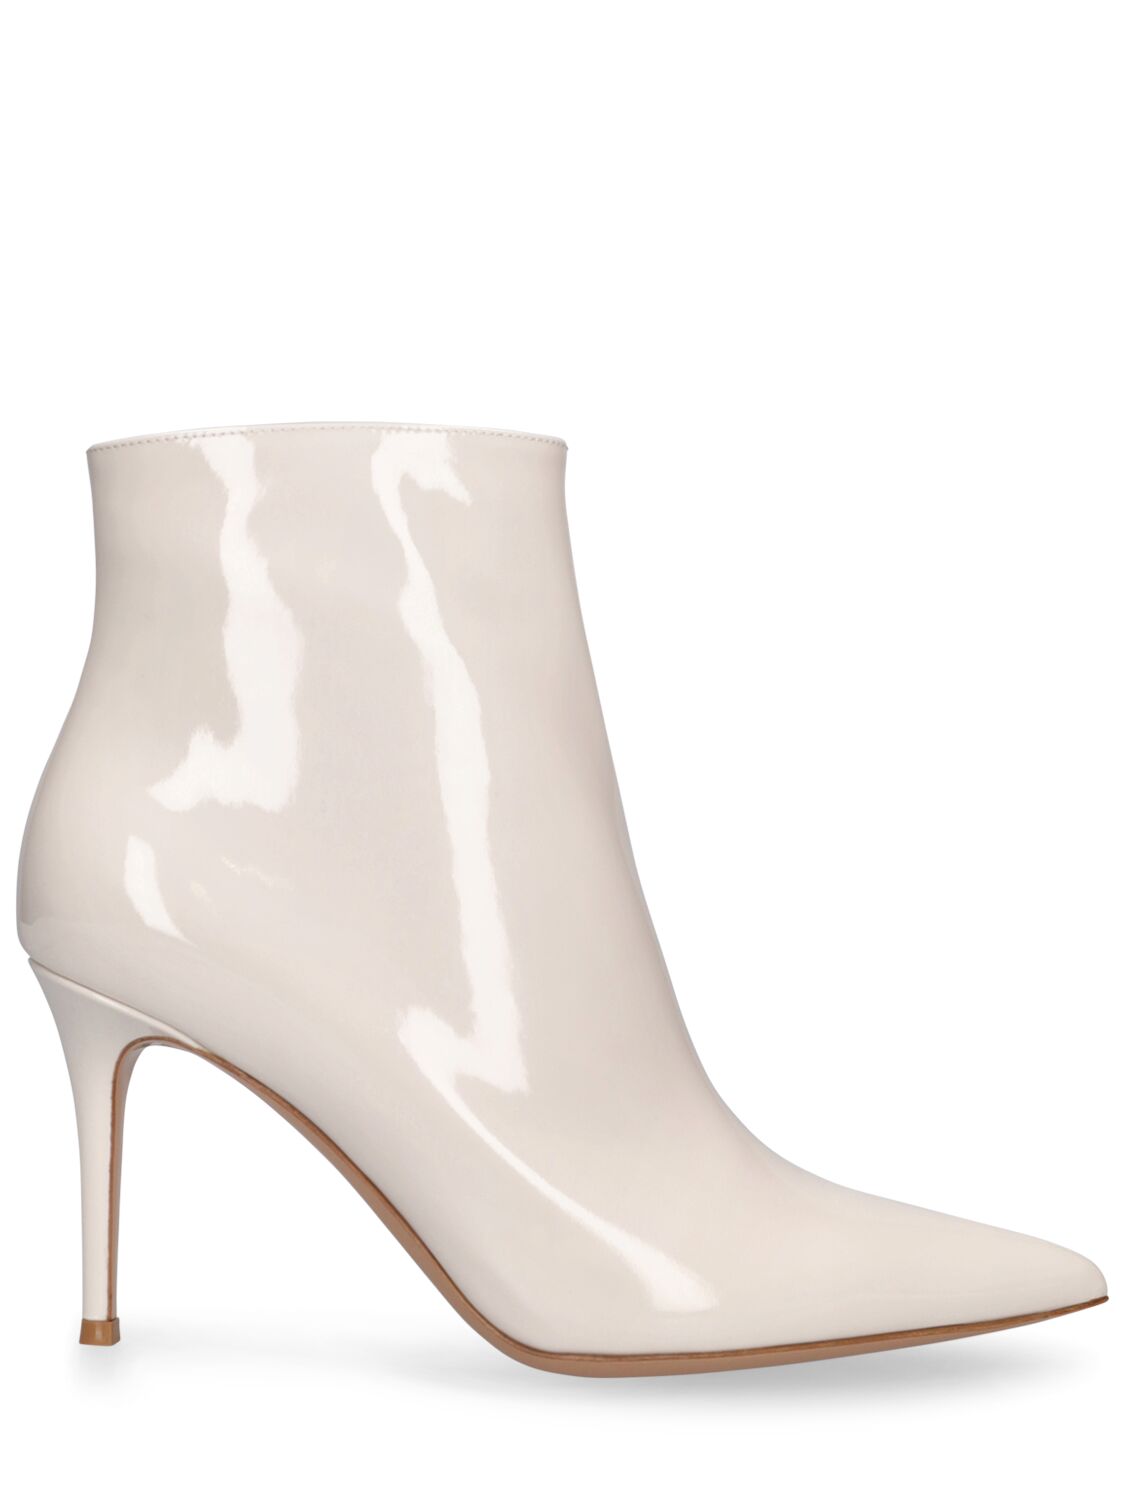 85mm Patent Leather Ankle Boots